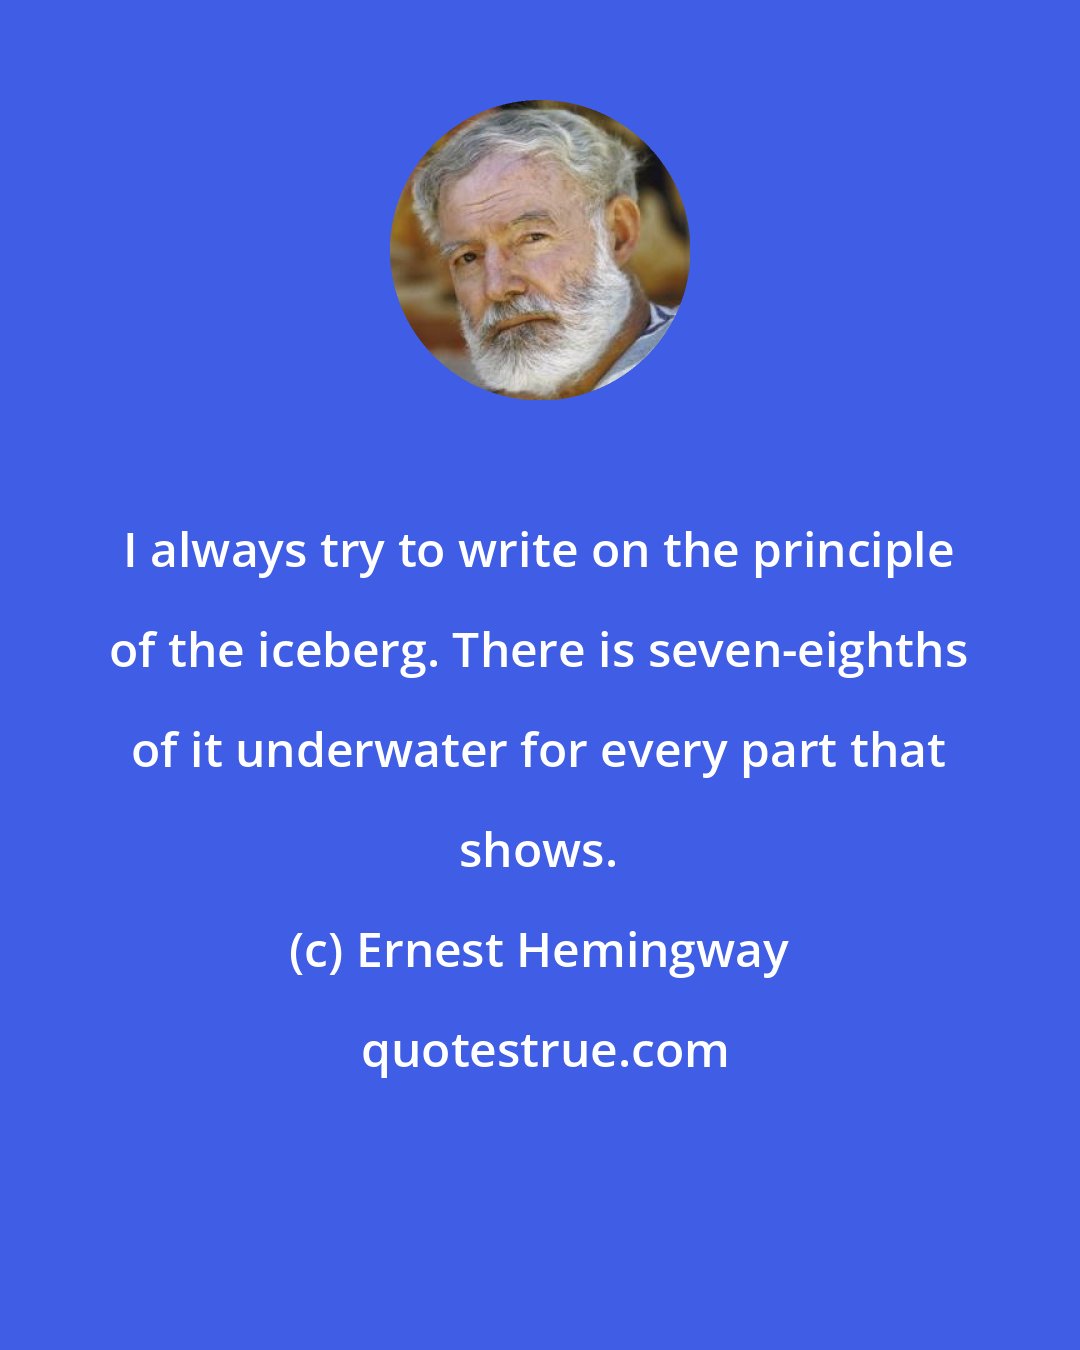 Ernest Hemingway: I always try to write on the principle of the iceberg. There is seven-eighths of it underwater for every part that shows.